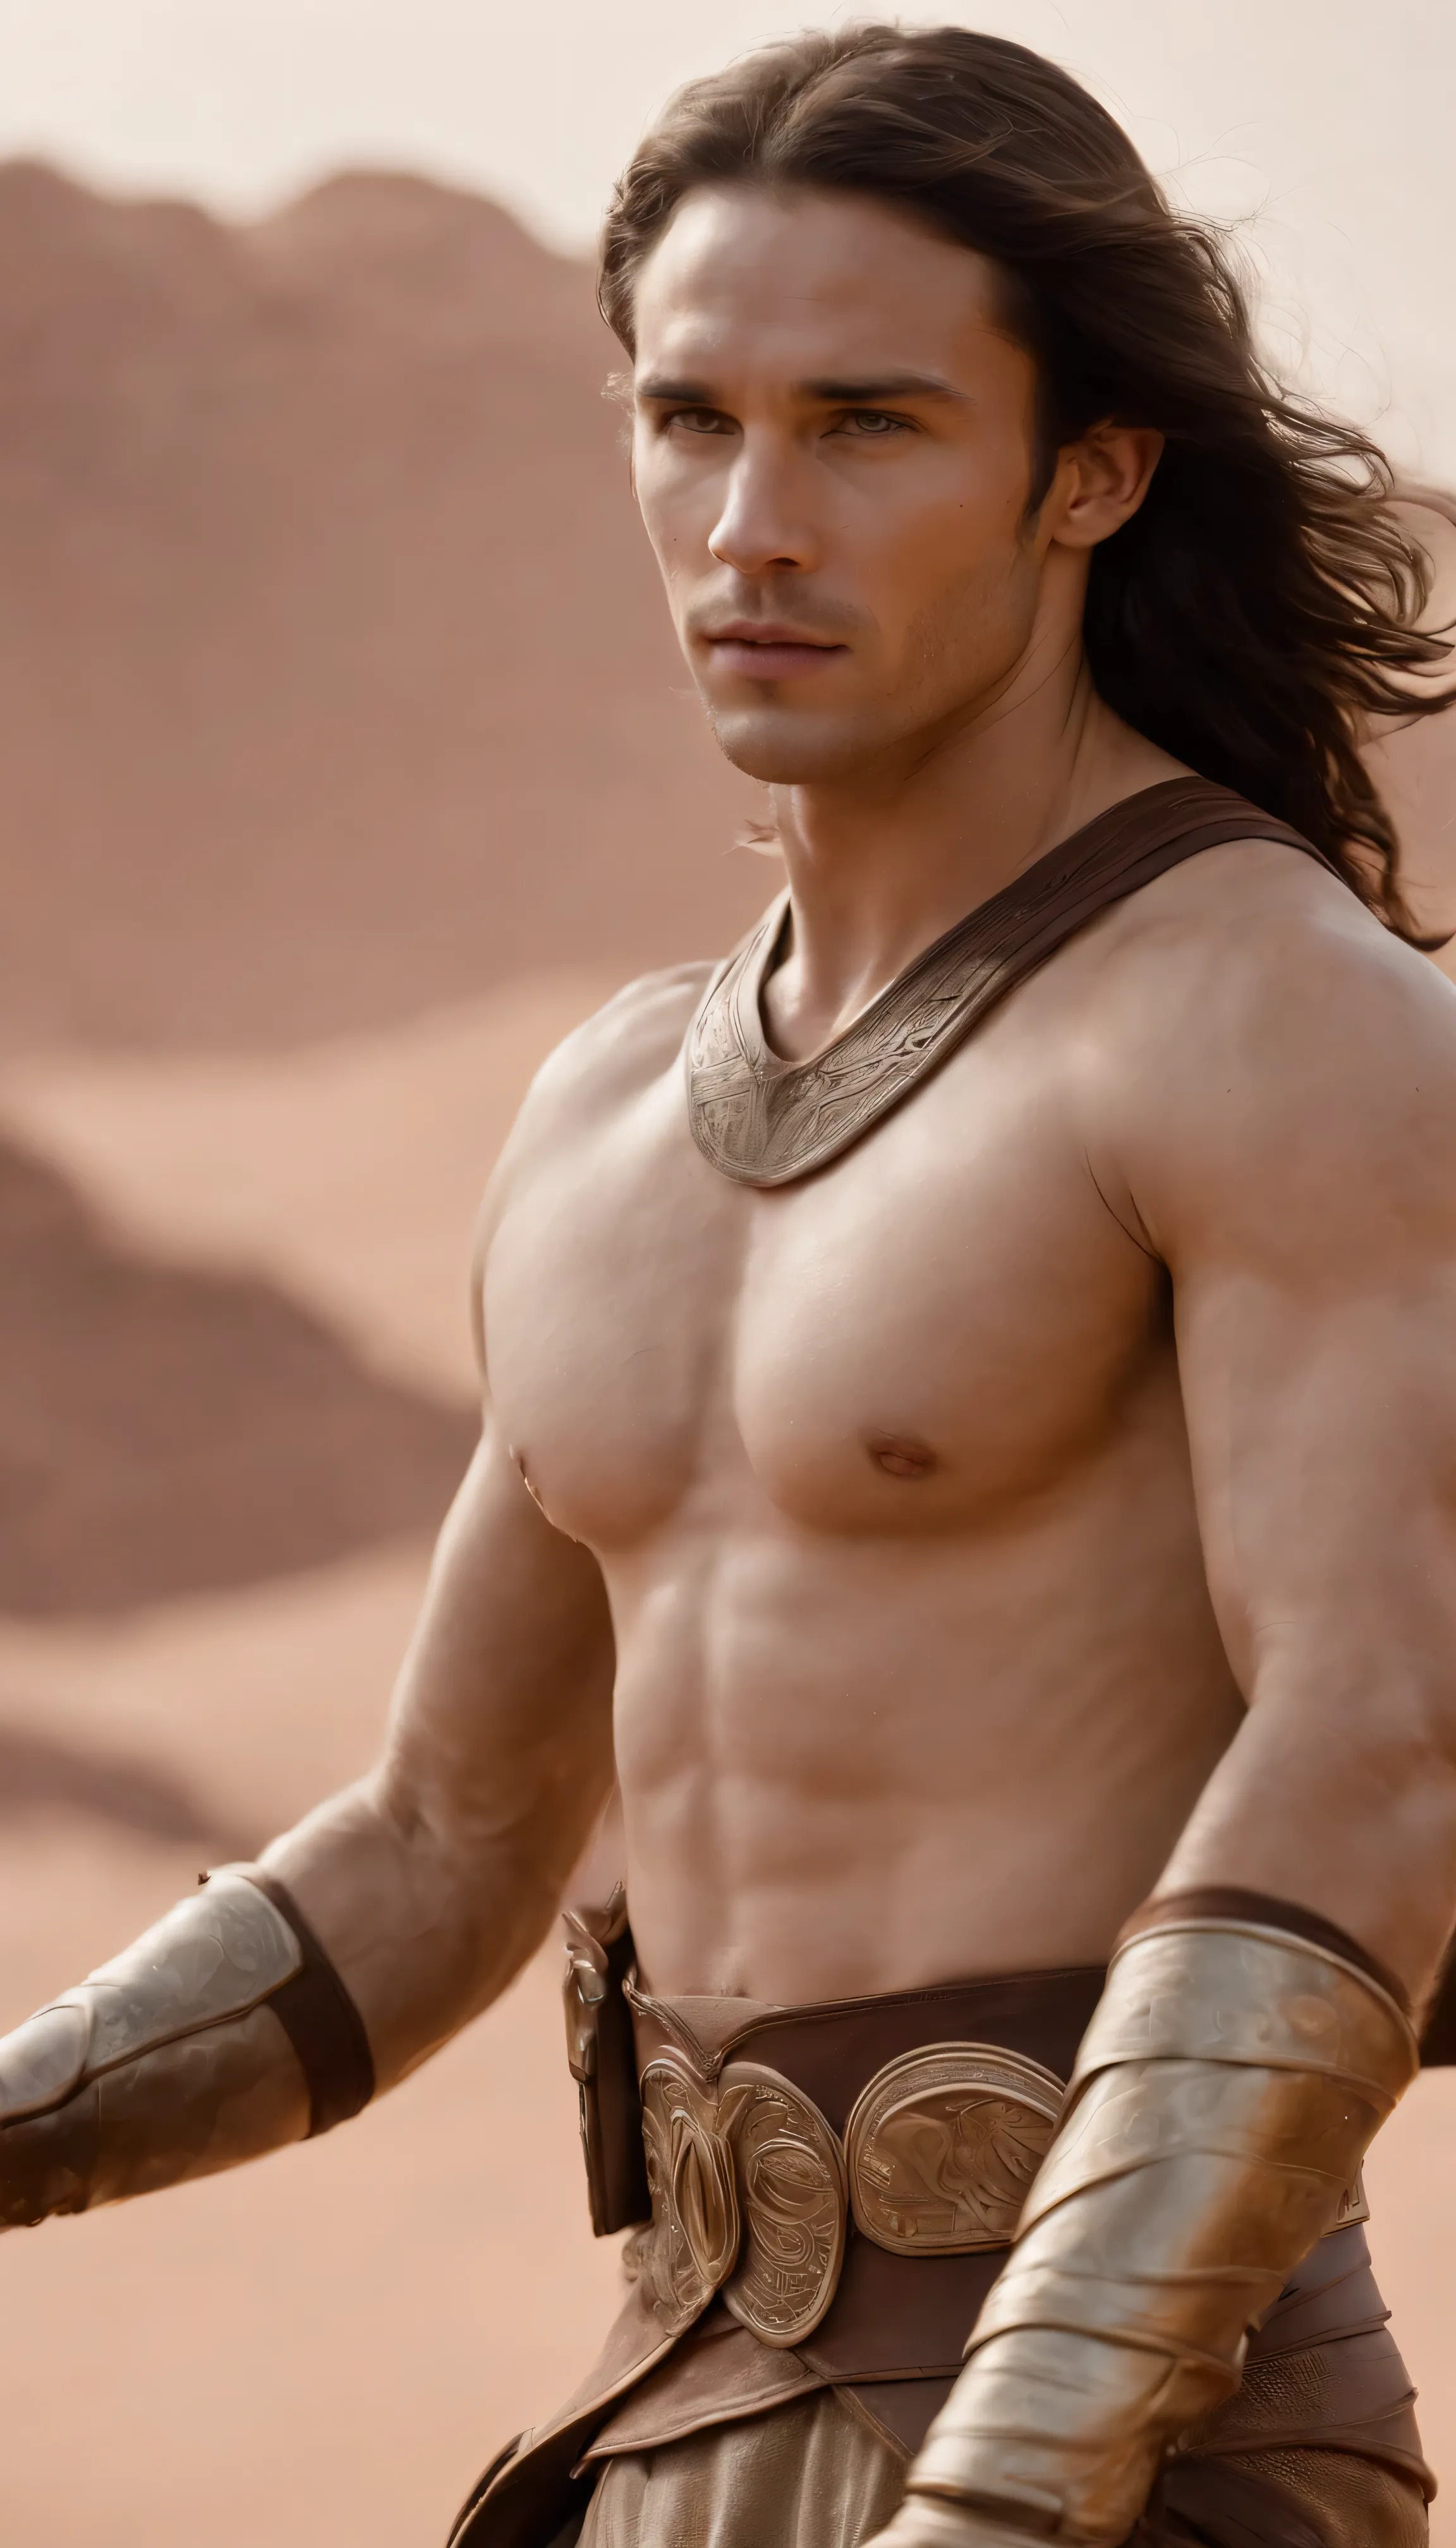 Cinematic masterpieces「John Carter」High-definition images include、The protagonist, Taylor Kitsch、The video shows the sleek, futuristic hoverbike cruising through space in style.。Deeply carved features and lively eyes、It captures the essence of adventure across a far-flung planet.。Taylor Kitsch face details，Powerful scene